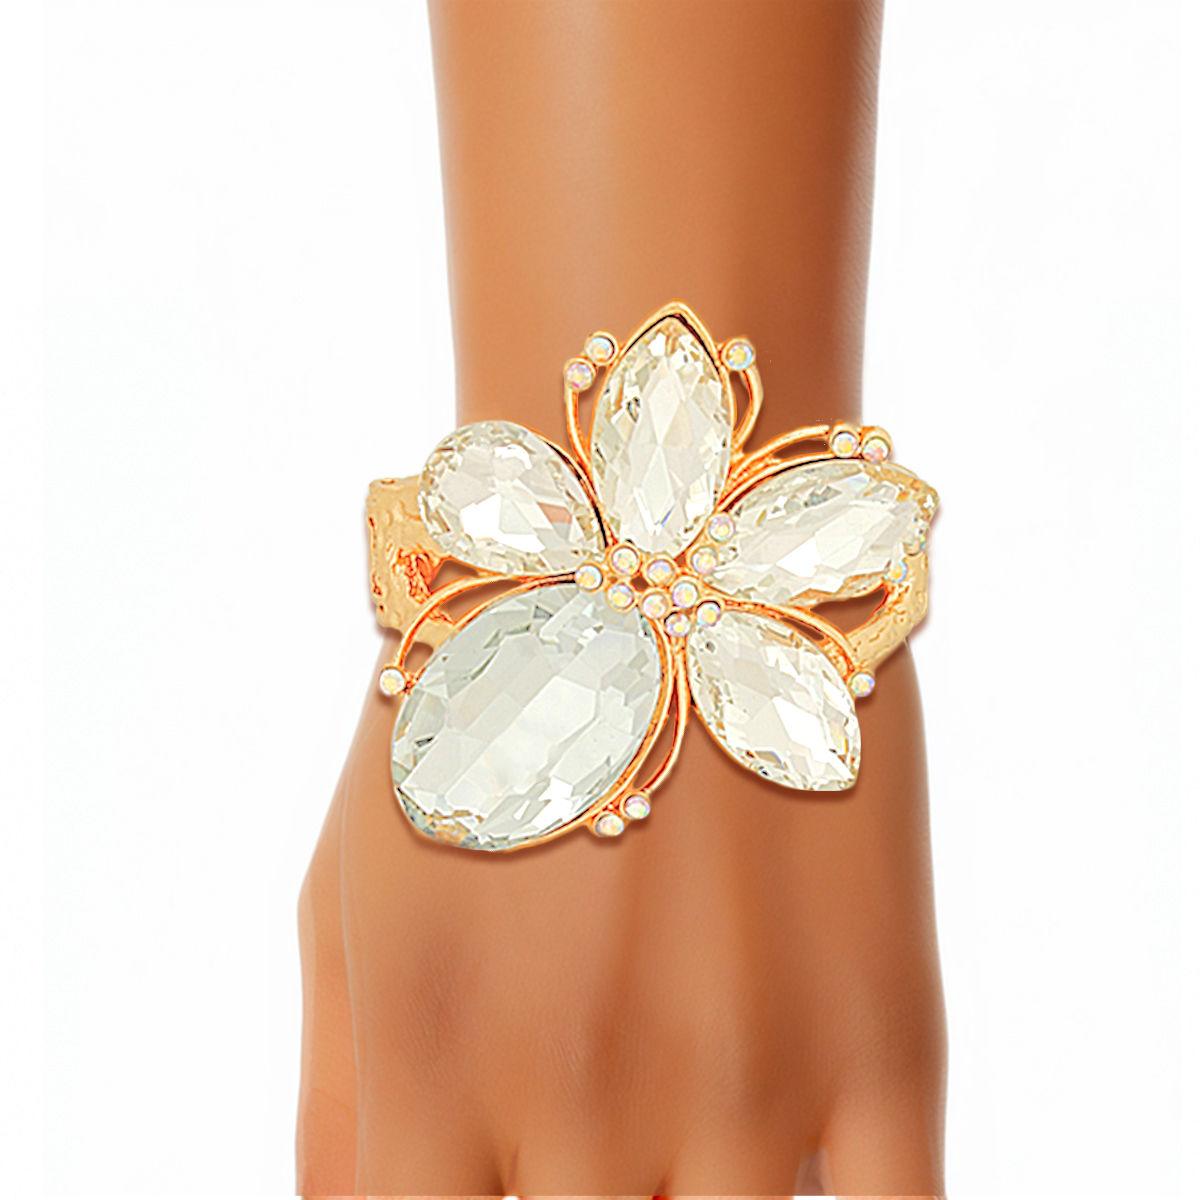 Transform Your Look with a Stunning Gold/Clear Flower Bracelet